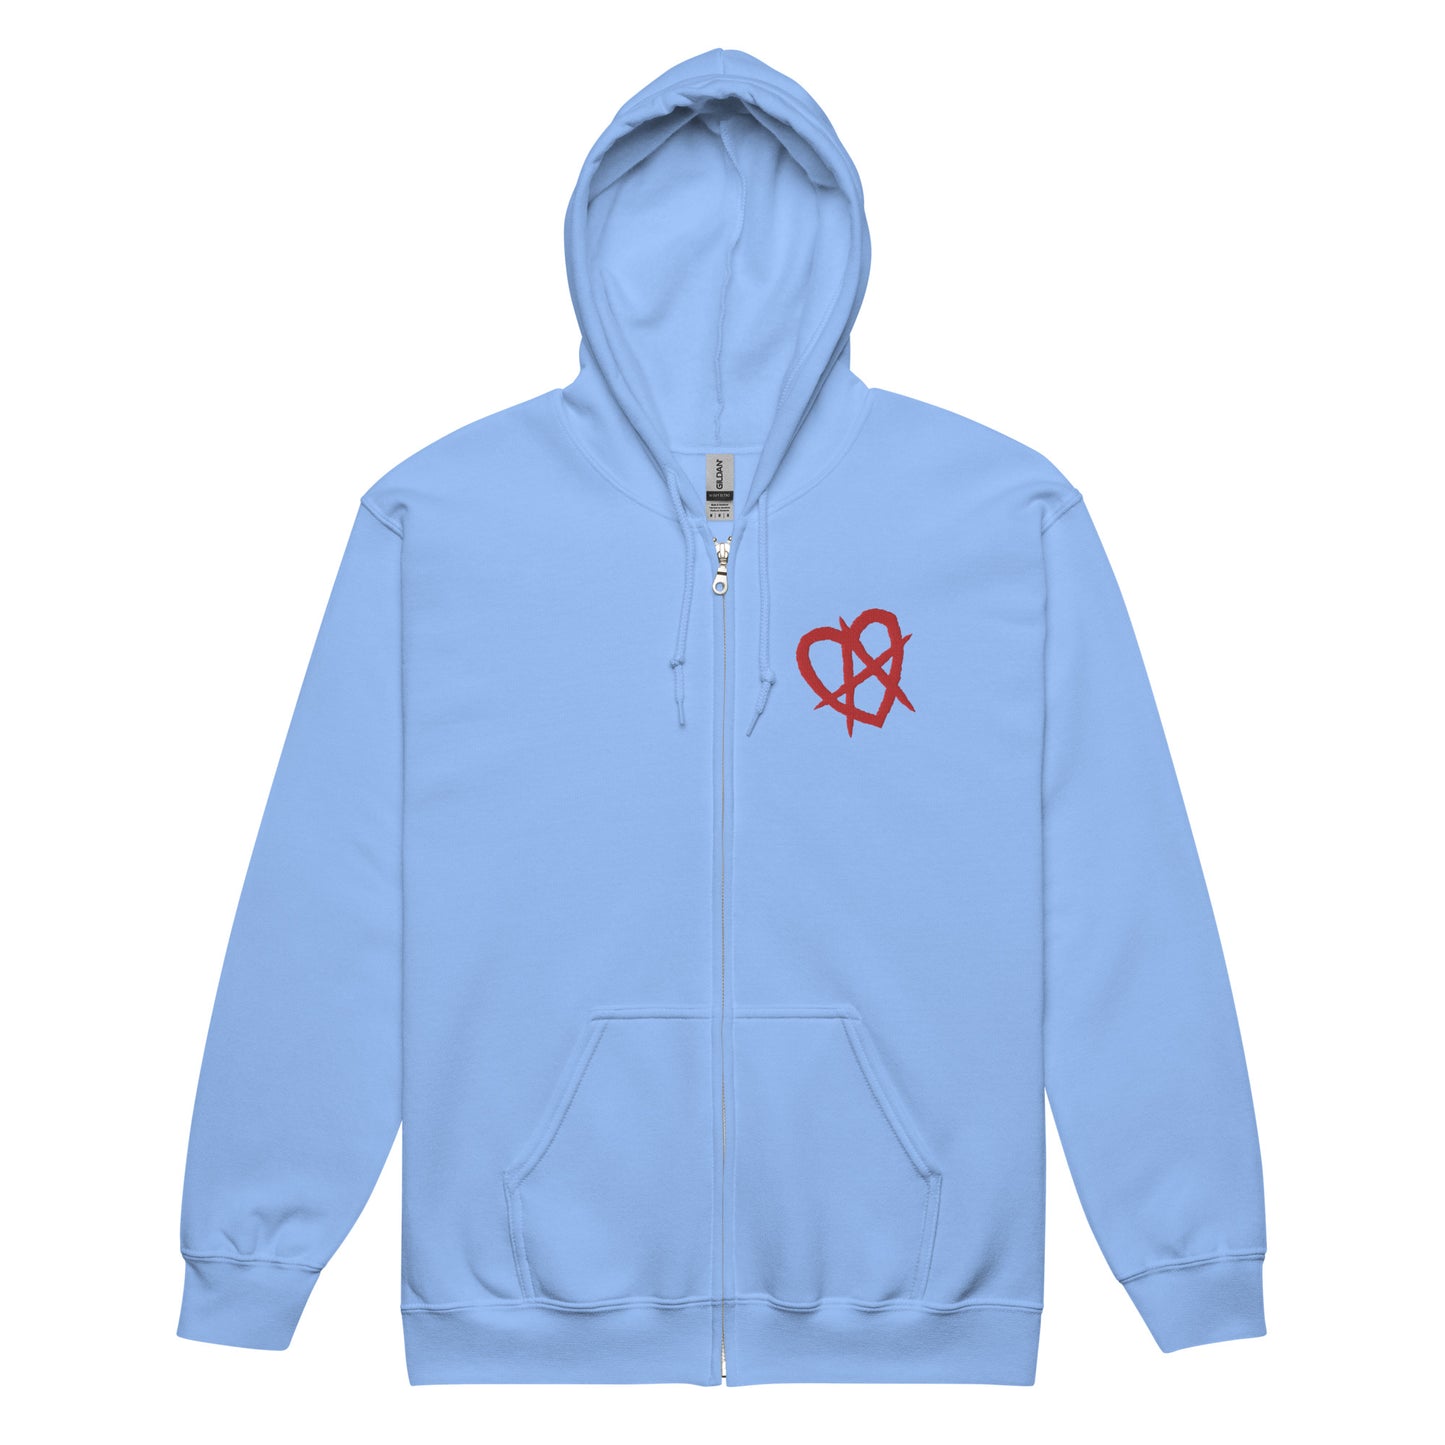 The Montauk Affect Embroidered Unisex Anarchy Heart Zip Up Hoodie